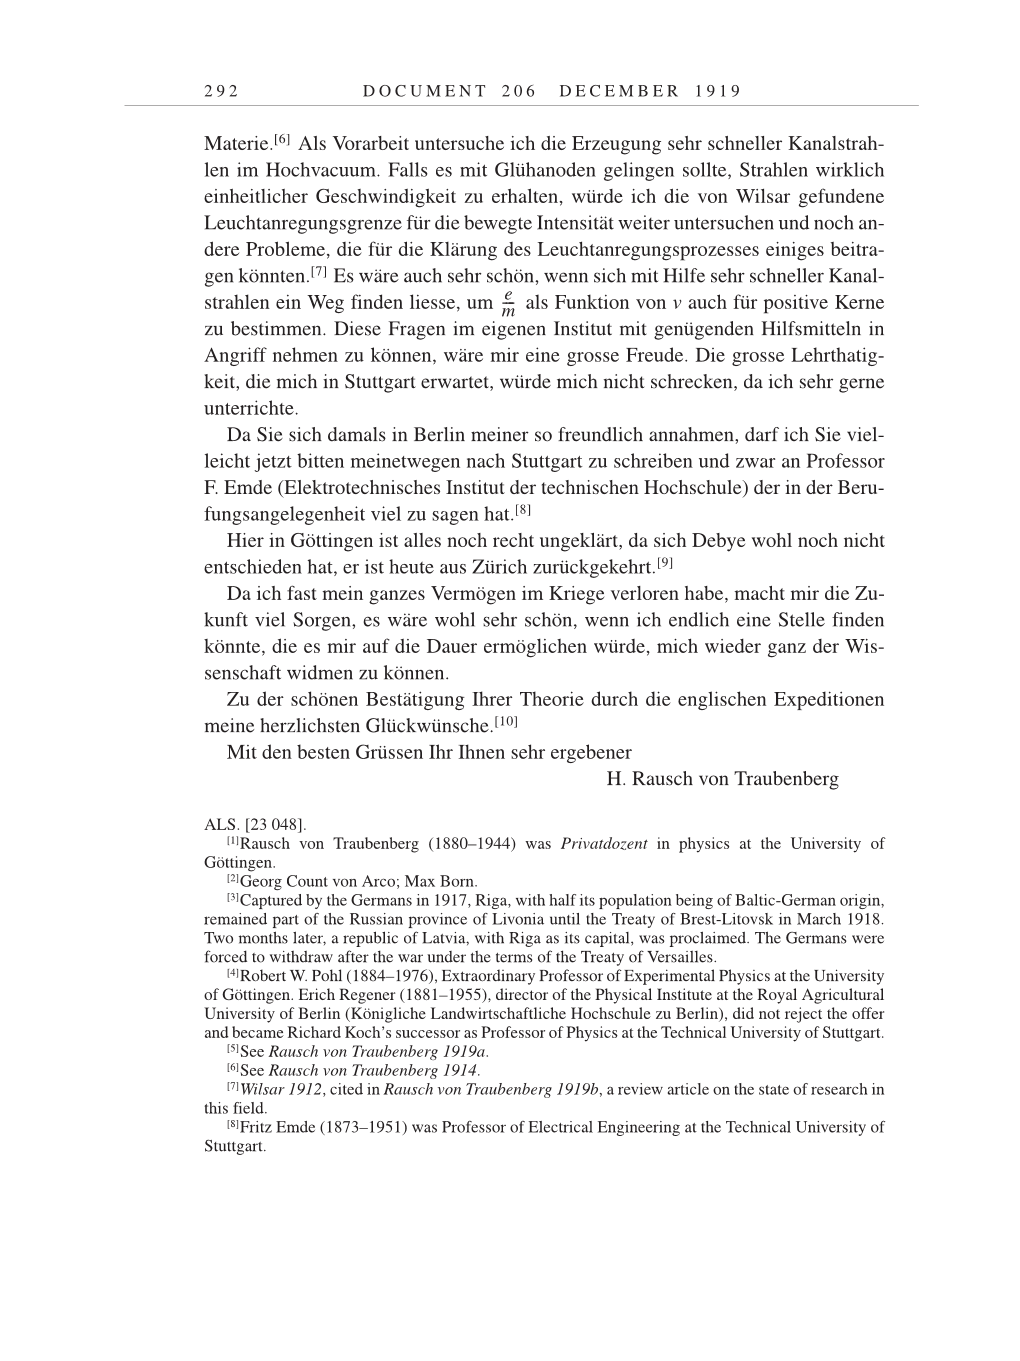 Volume 9: The Berlin Years: Correspondence January 1919-April 1920 page 292